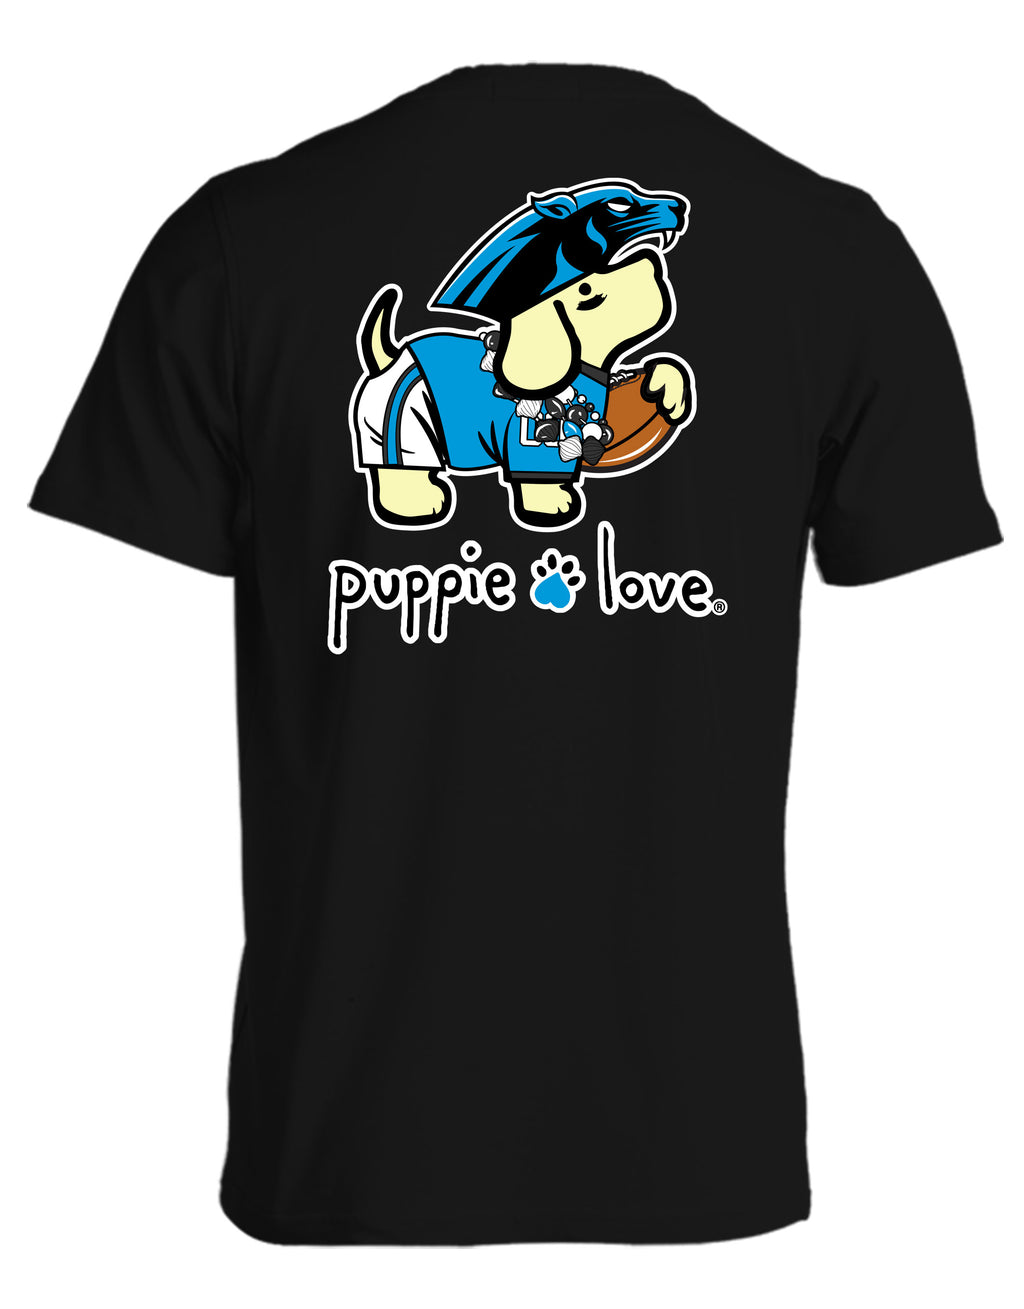 BLACK AND BLUE MASCOT PUP - Puppie Love